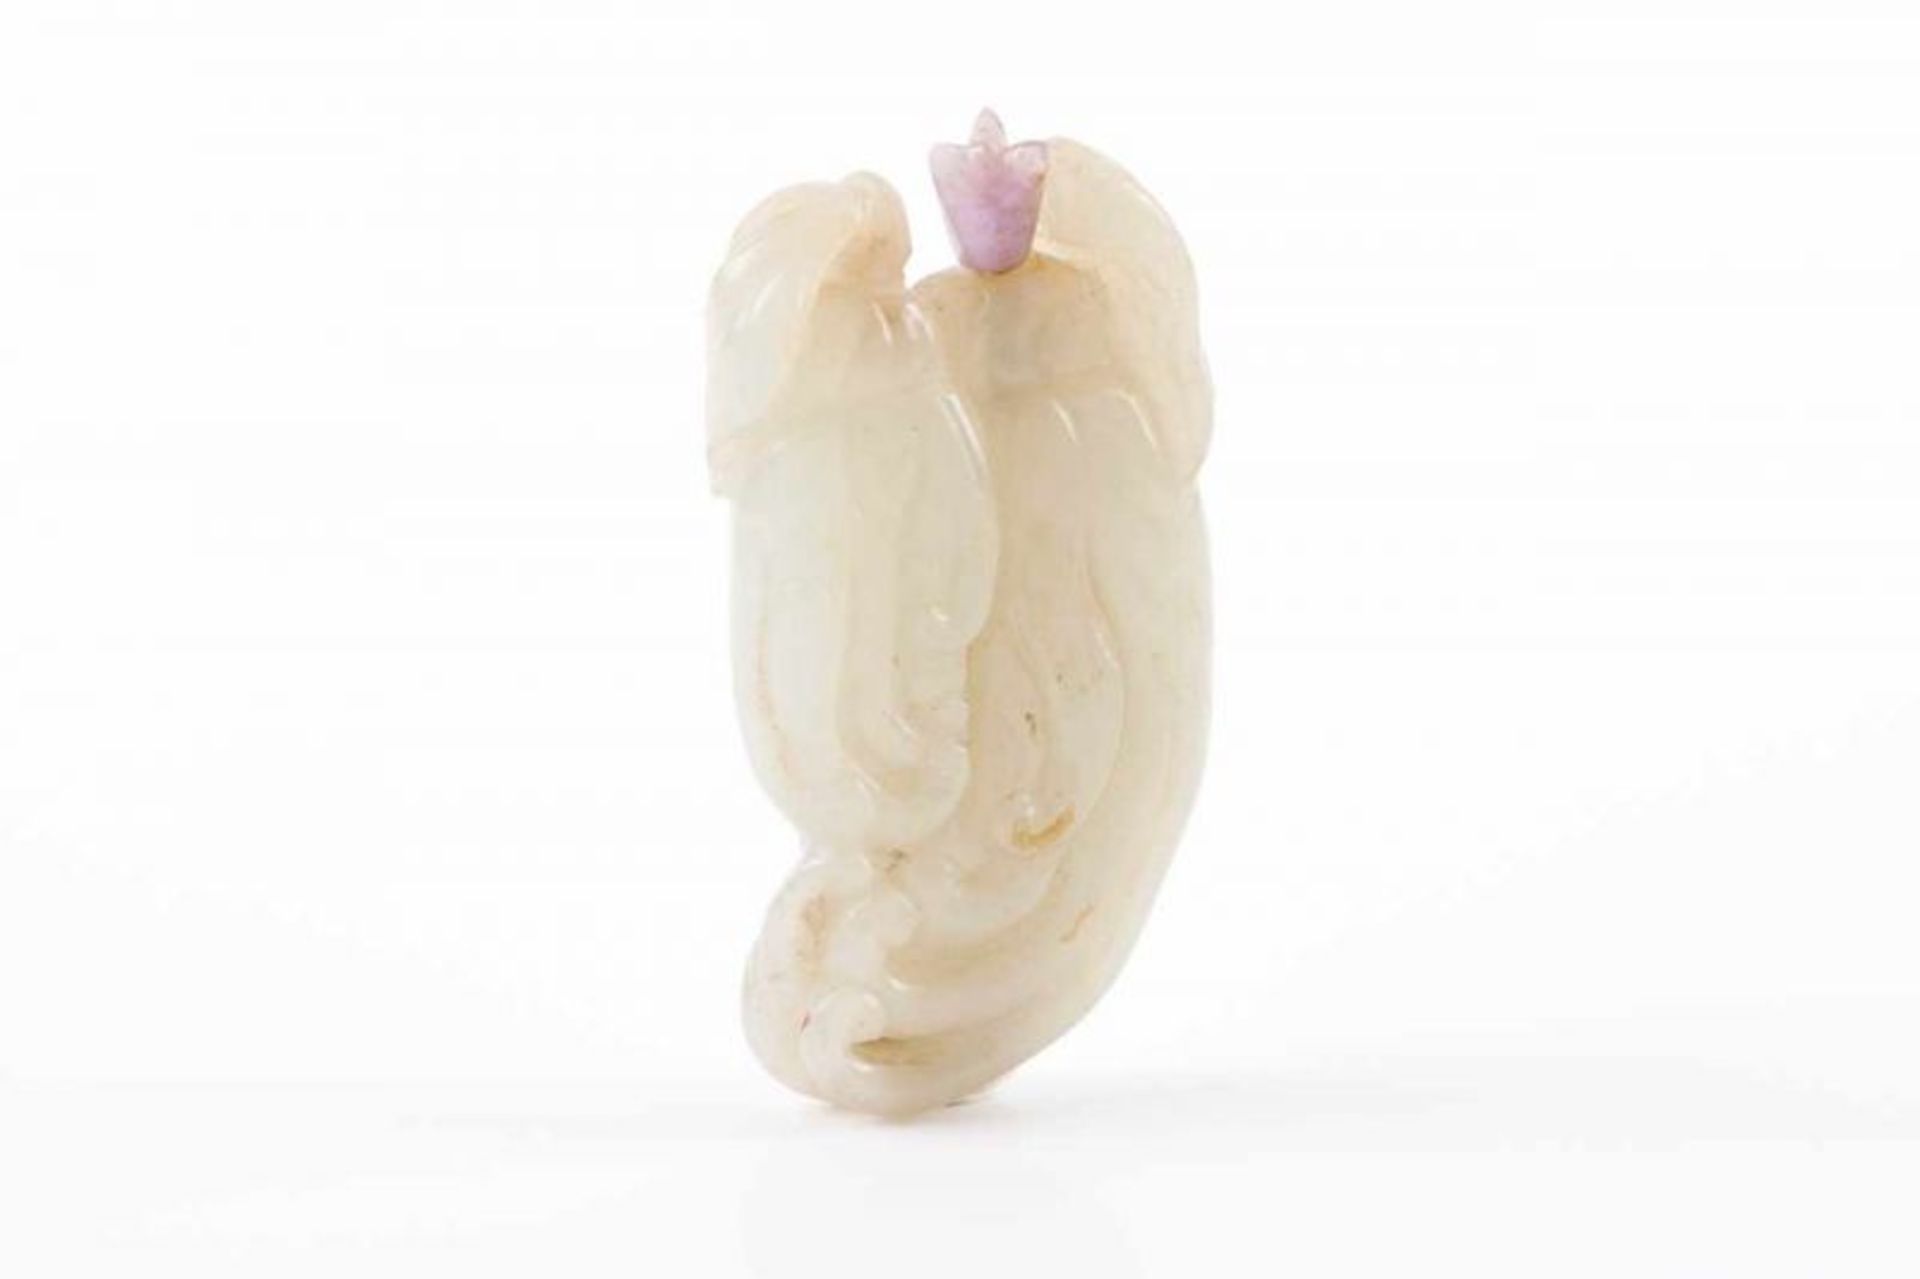 Snuff-bottle Jade Carved decoration representing hands of Buddha Pink quartz cover China, Qing